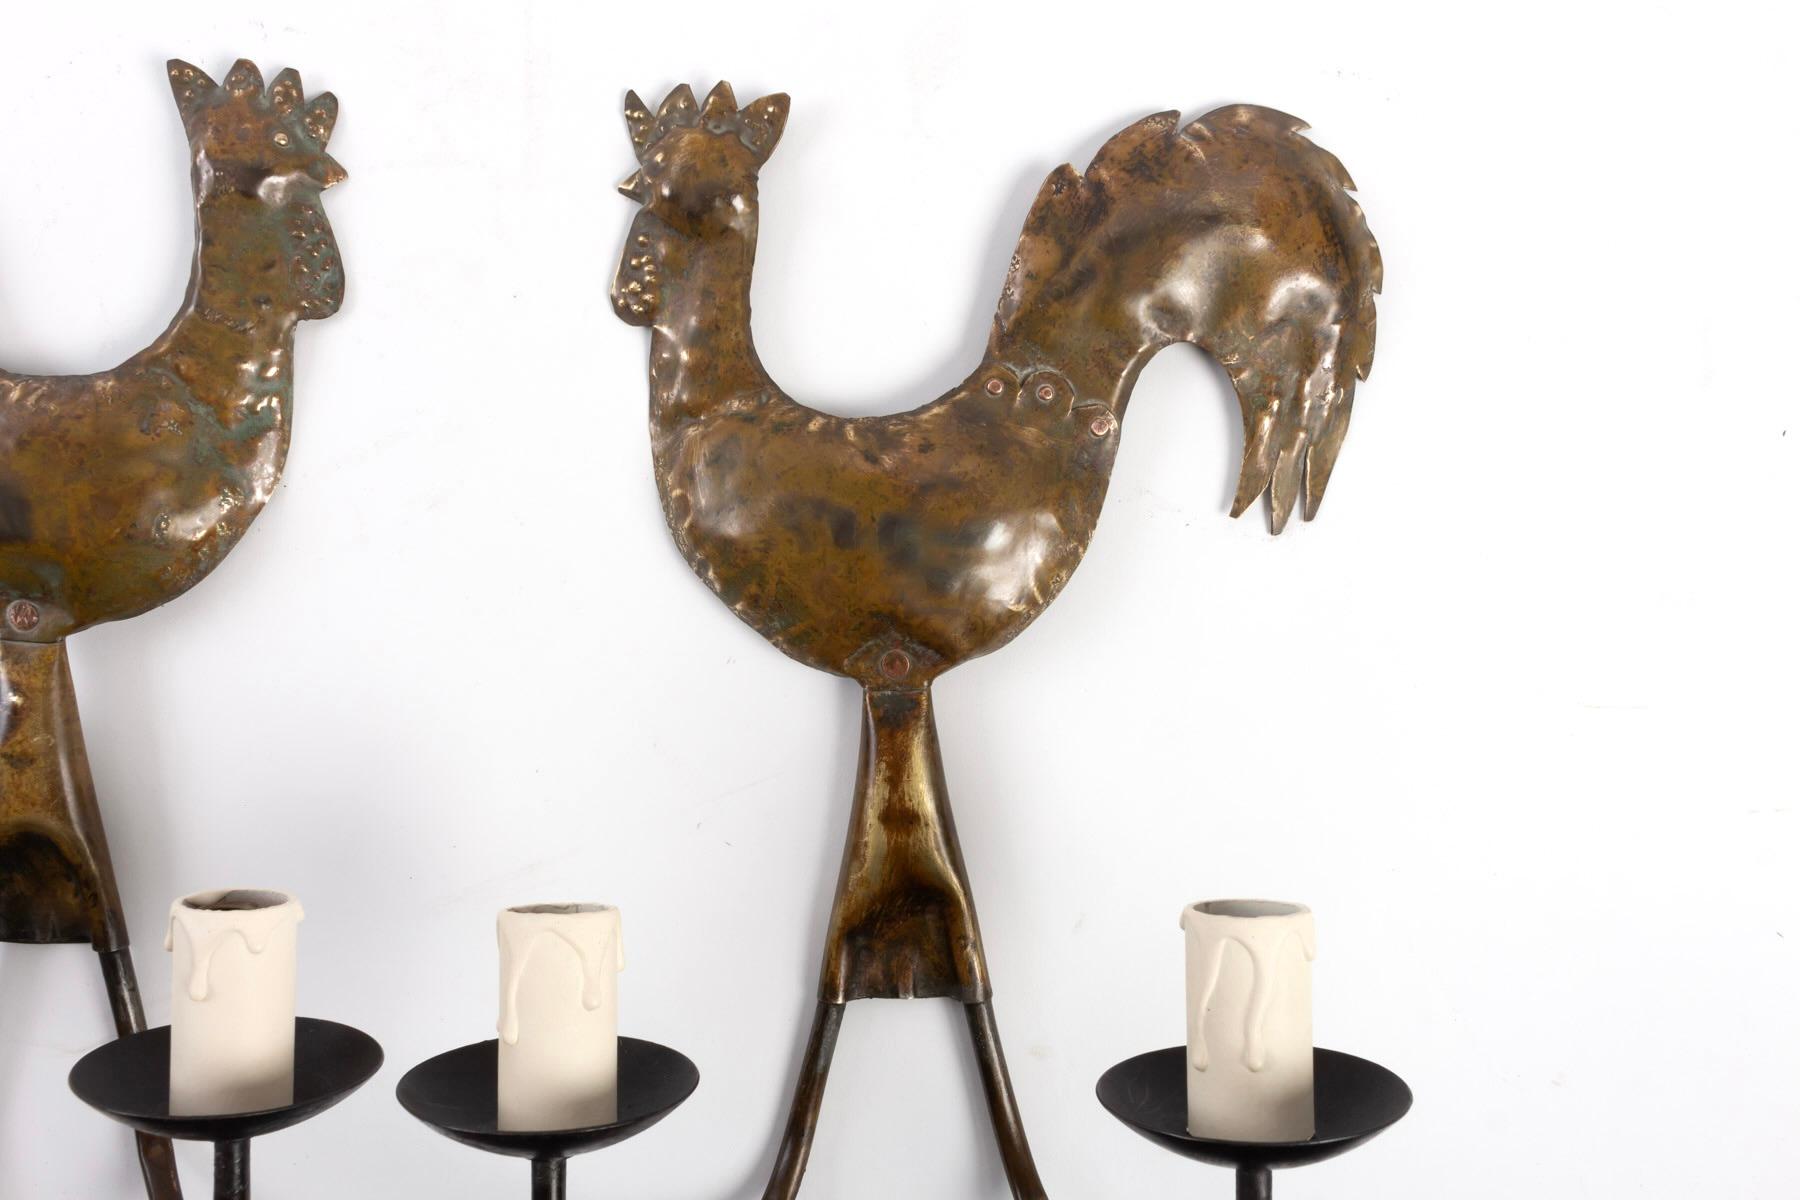 The upper part of the sconce features a rooster formed by hammered and set brass plates, hand-cut and given a brown patina. 
On the lower part, two upward-facing black wrought-iron luminous arms are underlined by cups and distributed on either side